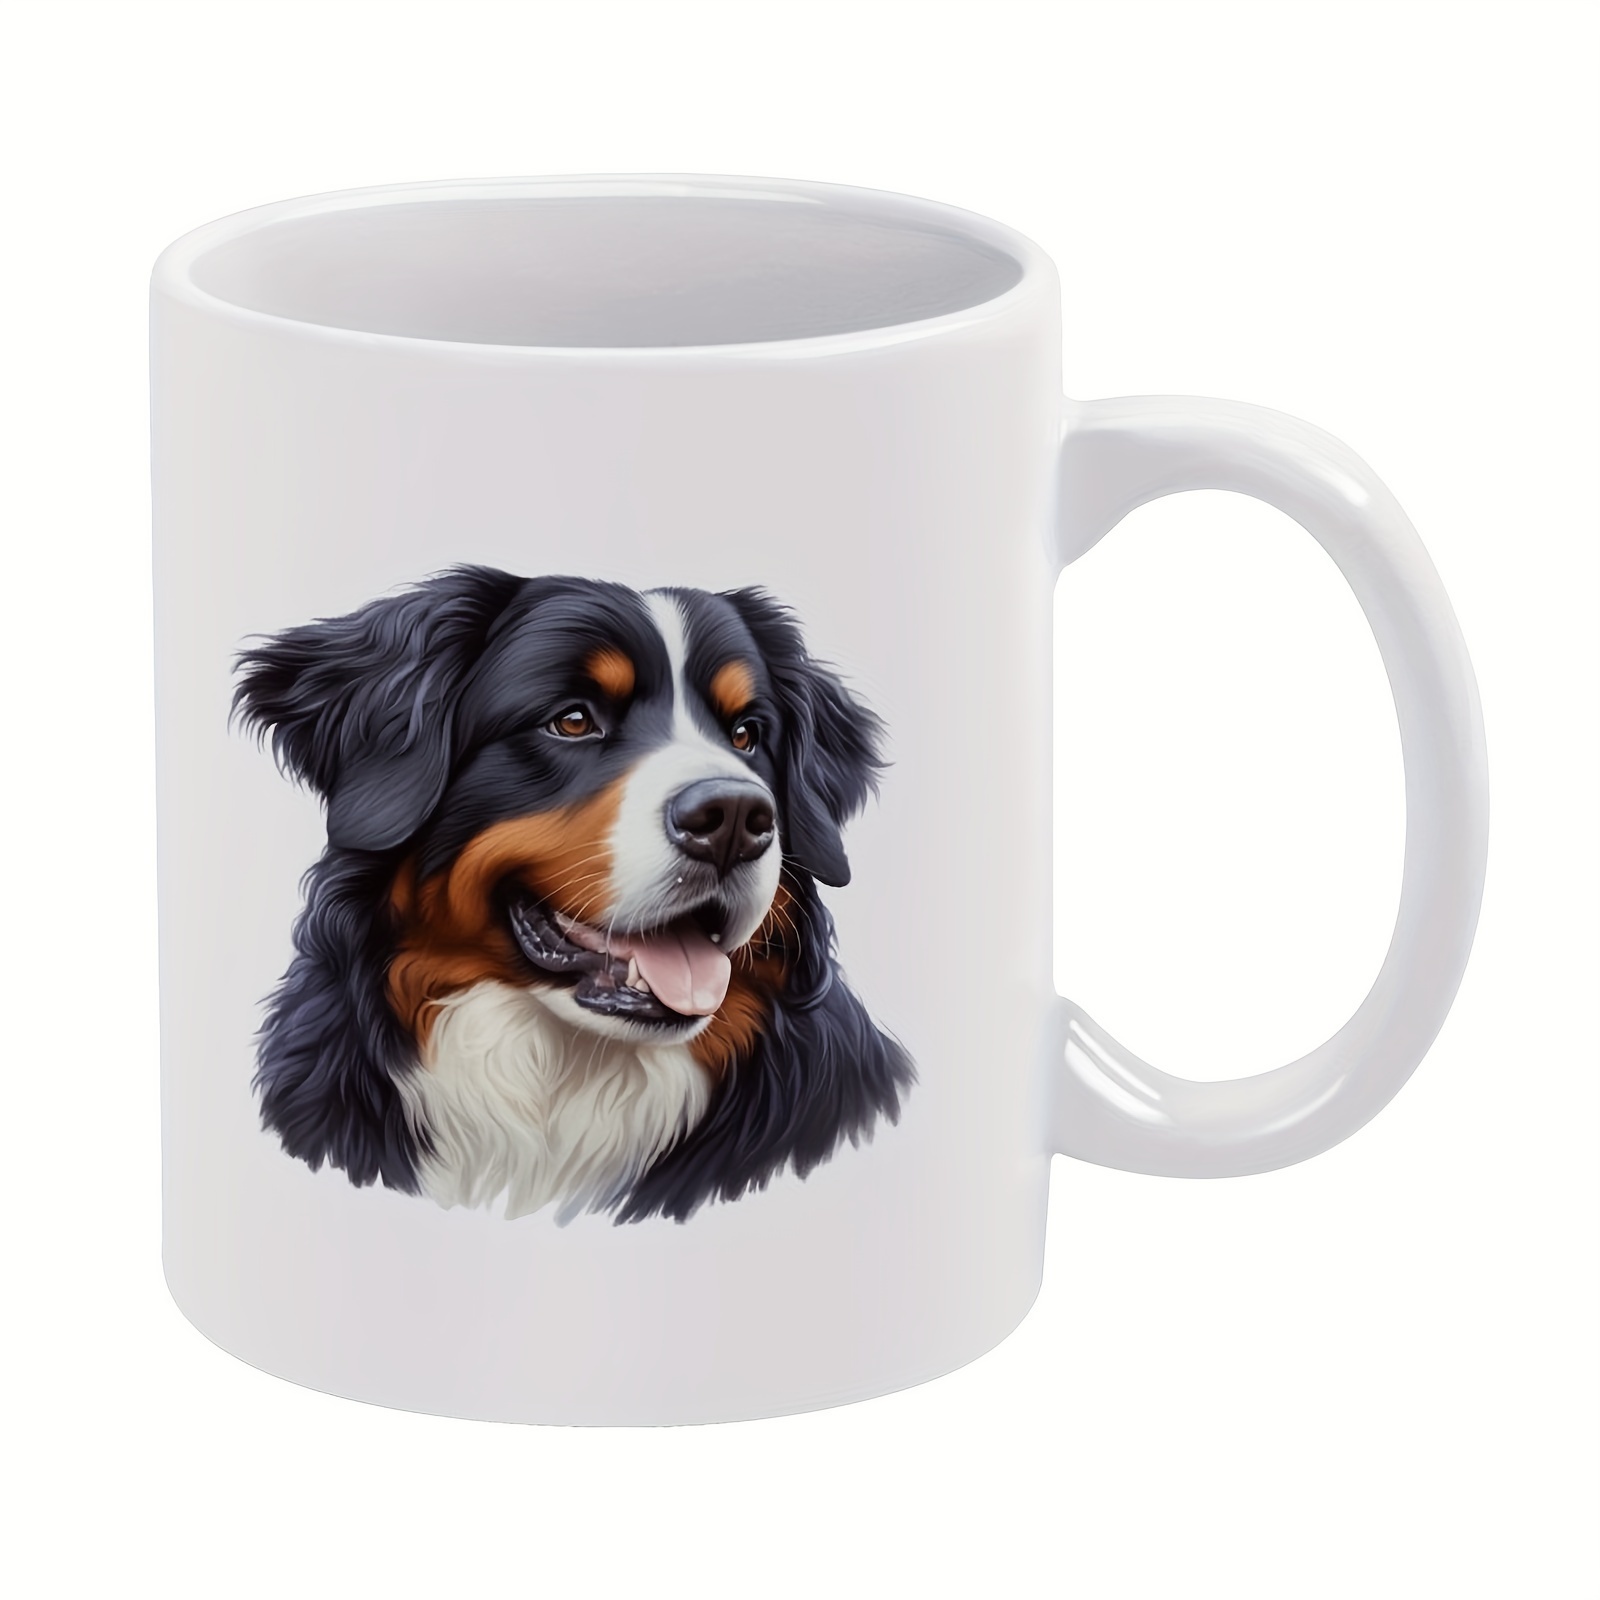 

1pc 11oz Mug, Coffee Mug, Bernese, Gift For Friends, Sisters, Coffee Drinker, Owner, Ceramic Cup, Christmas Gift, For Office